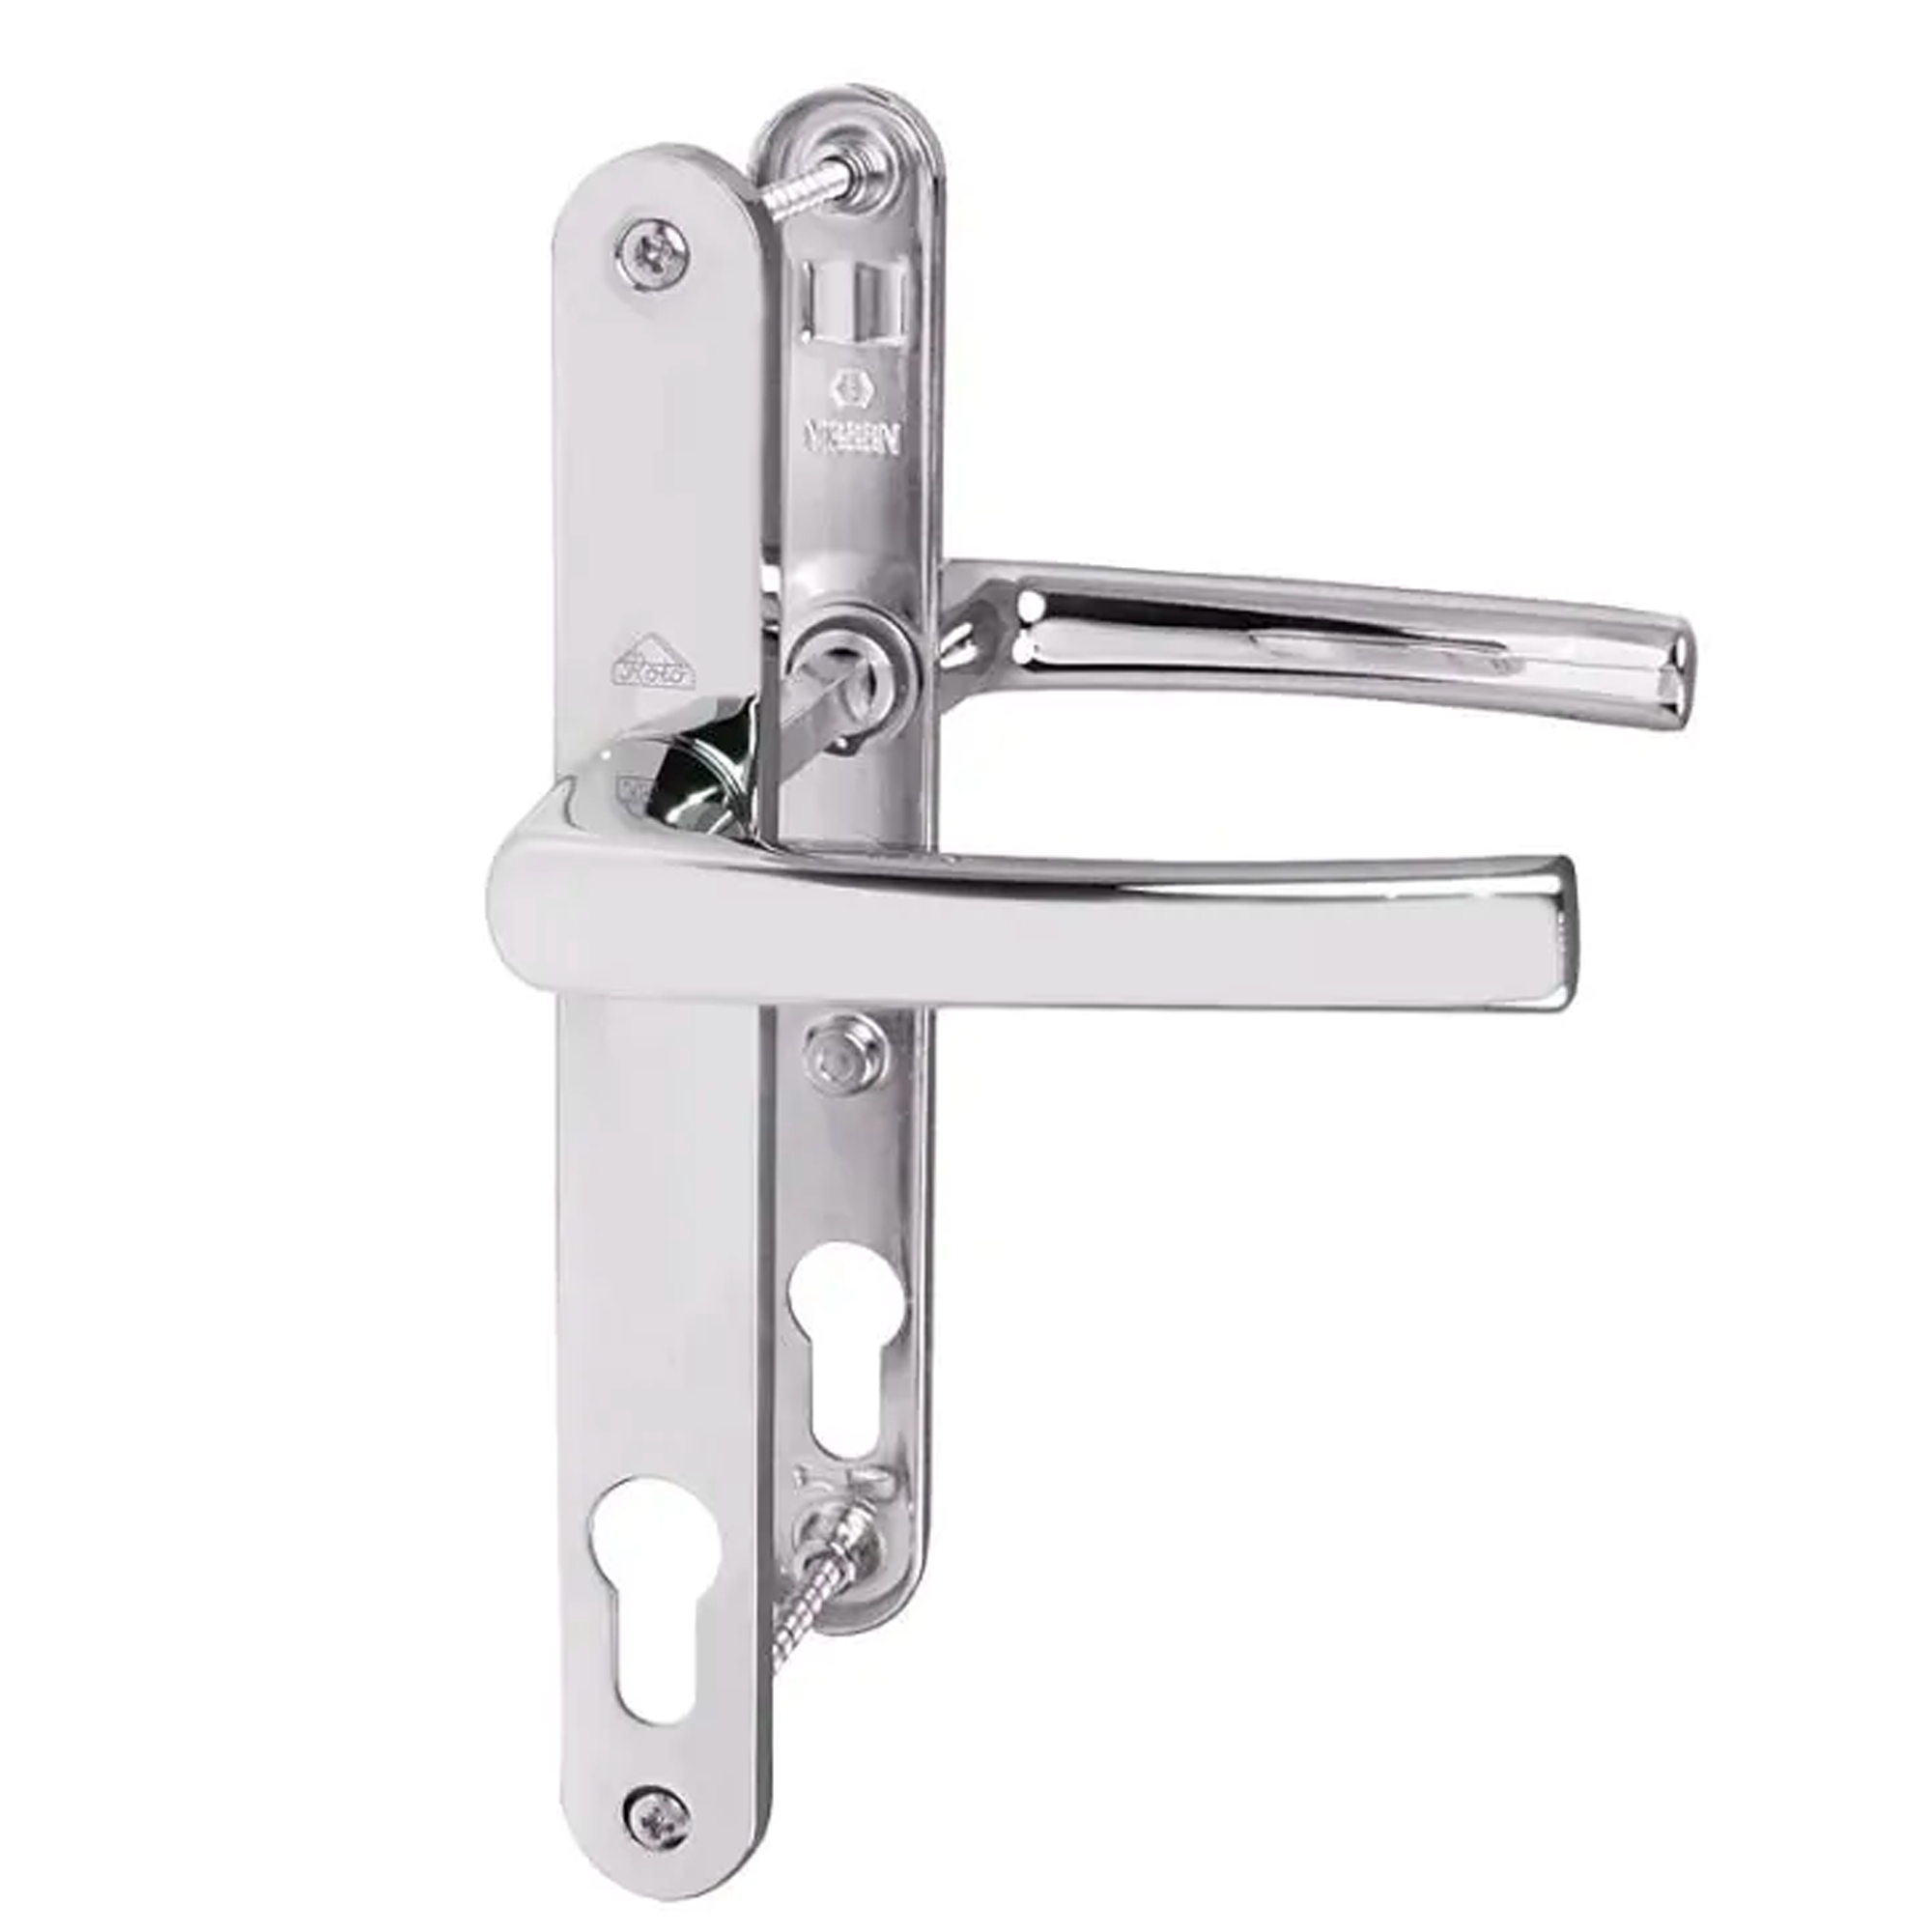 Genuine Roto Upvc Door Handle 200mm Screw Fix 2 Hole Fix 92mm PZ Sprung in Polished Chrome D66